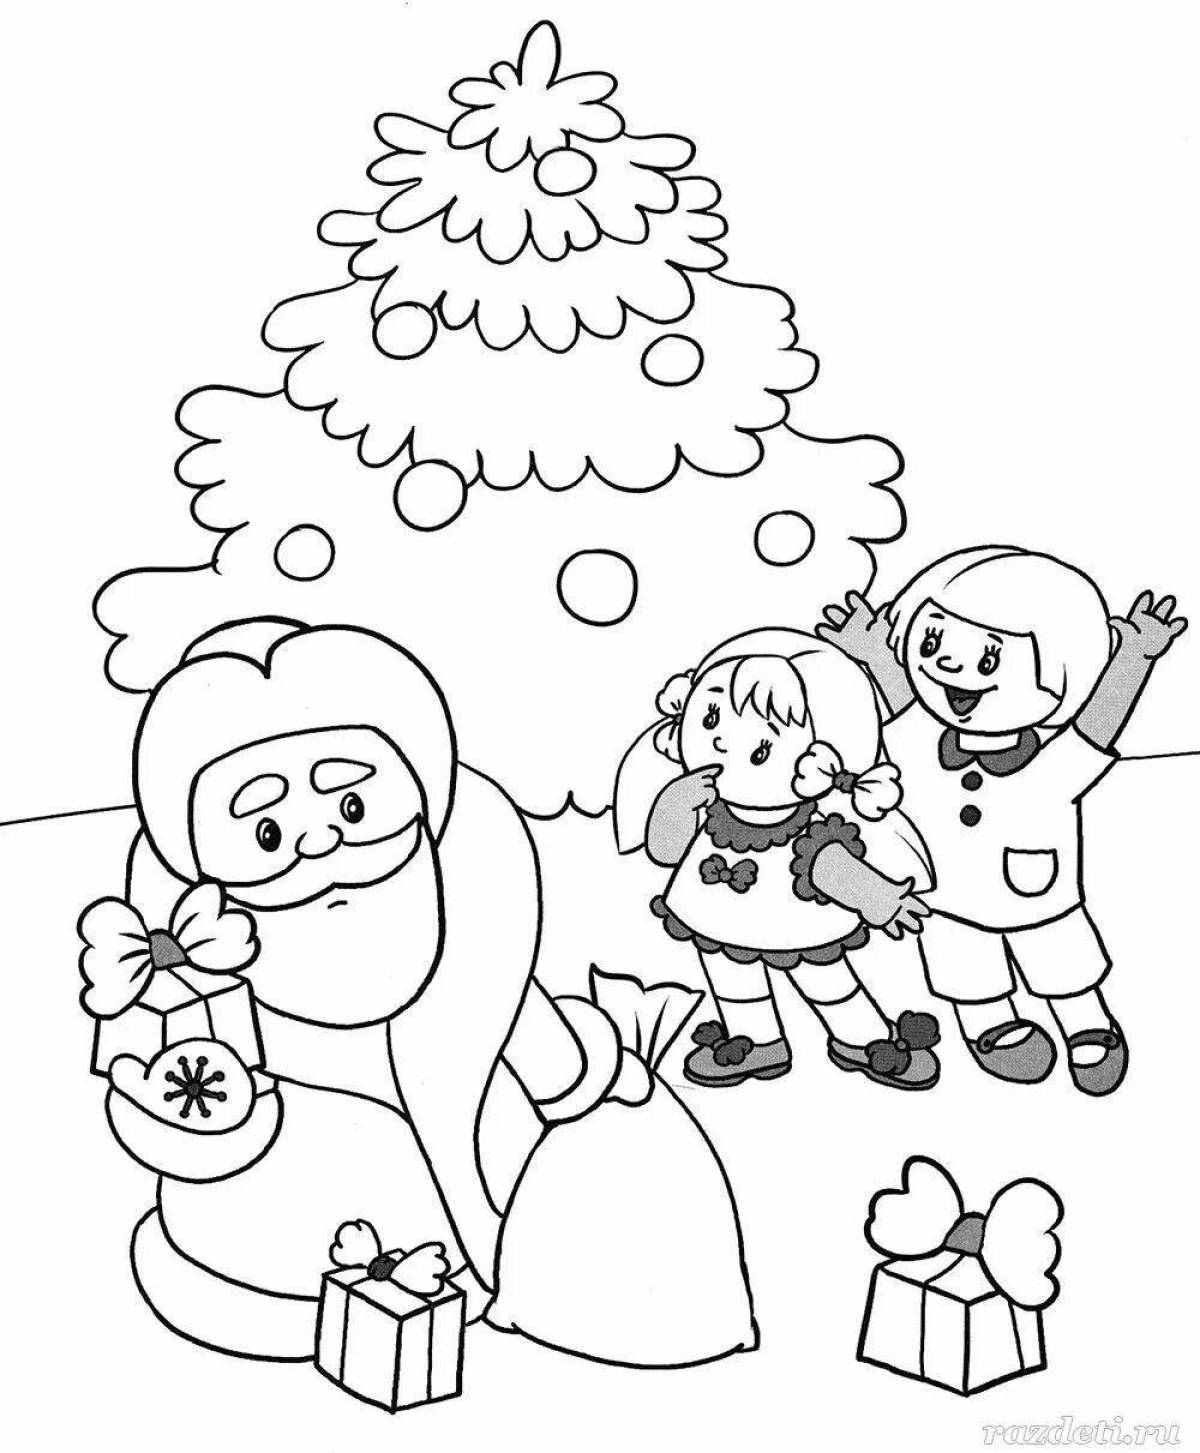 Adorable winter coloring book for 3 year olds